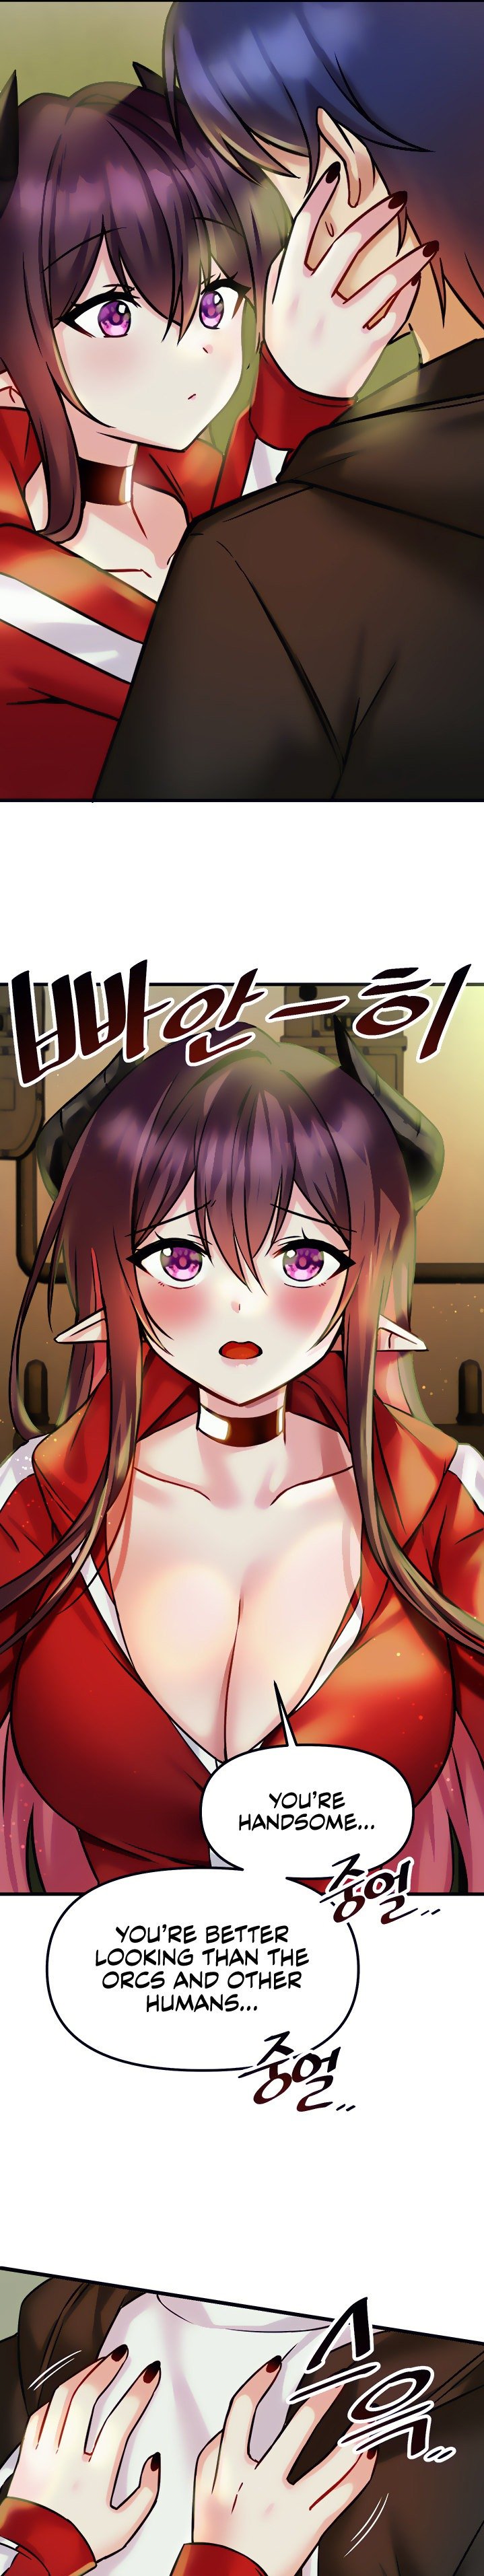 trapped-in-the-academys-eroge-chap-19-4